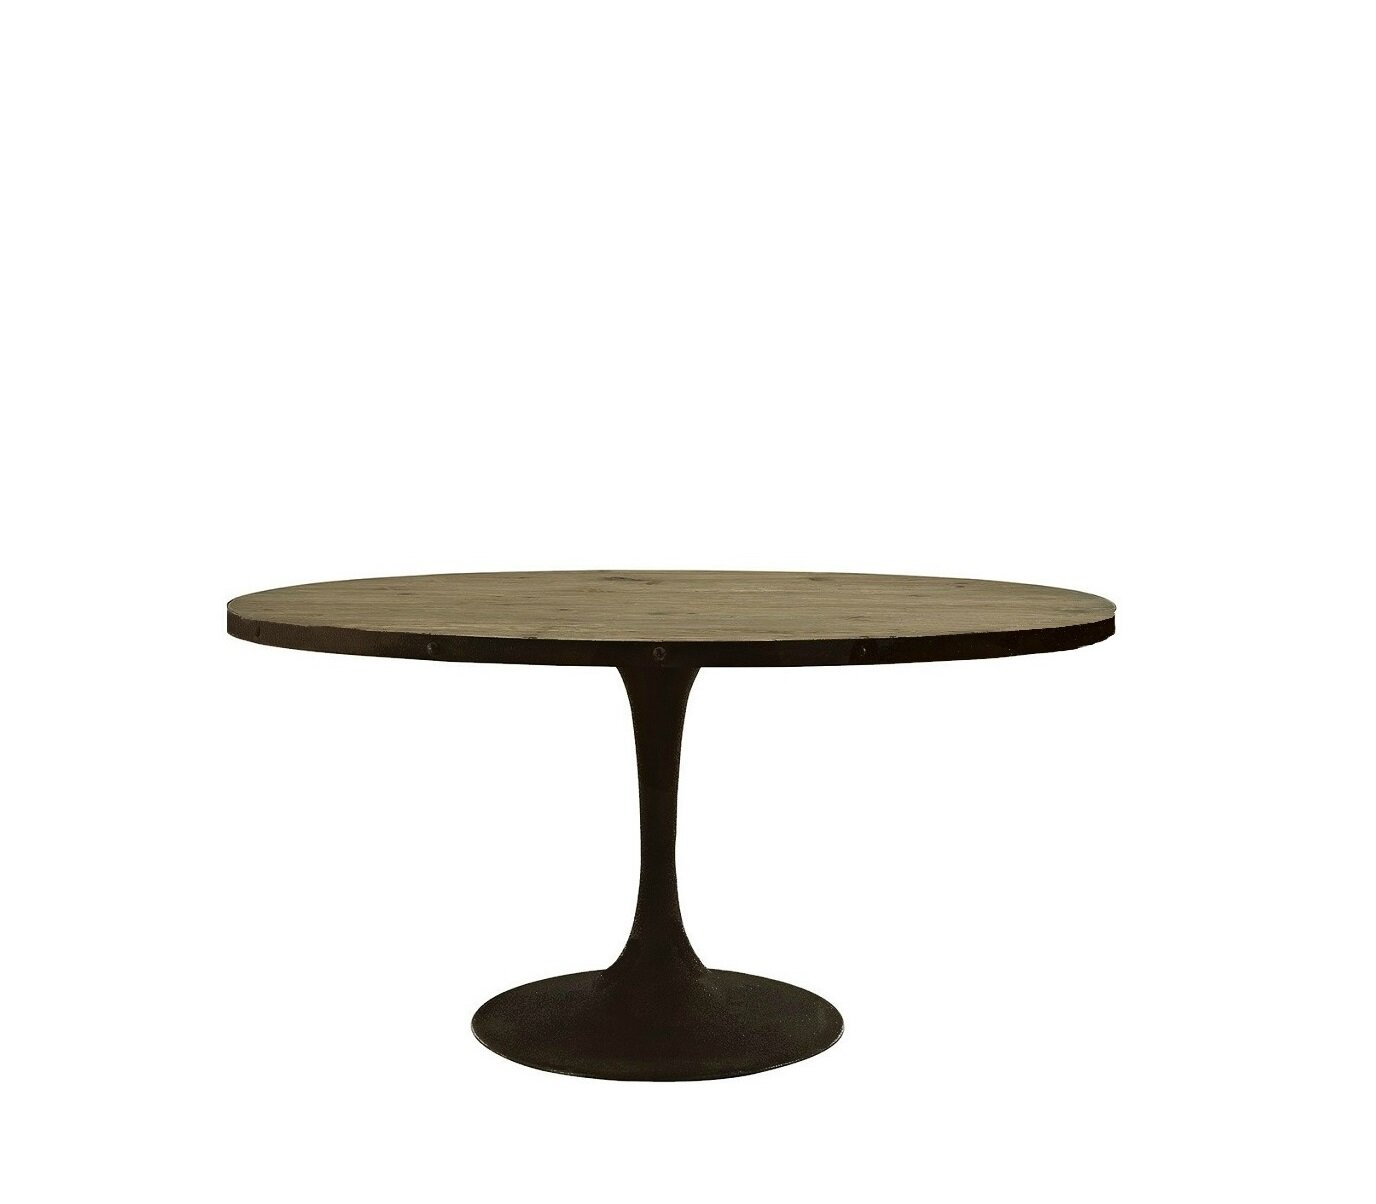 49" oval pedestal dining table